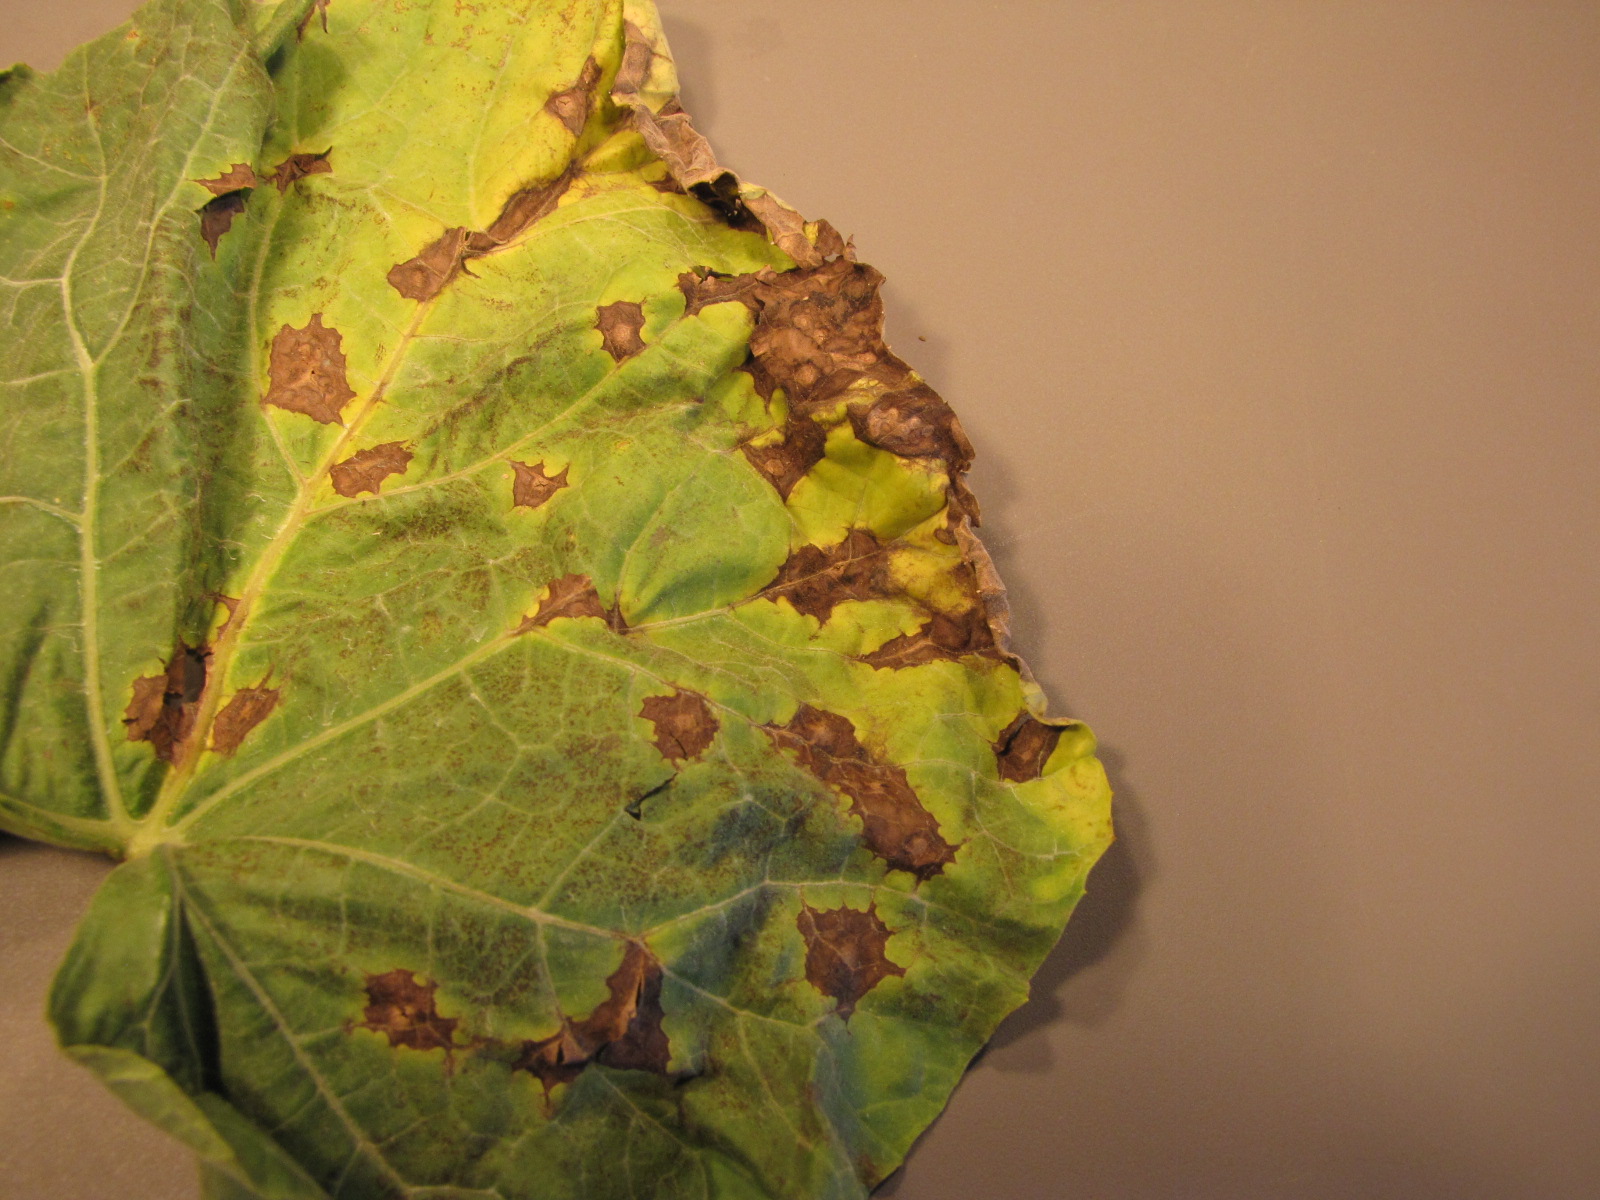 Figure 1. Lesions of anthracnose on bottle gourd. Note the jagged appearance of lesions.